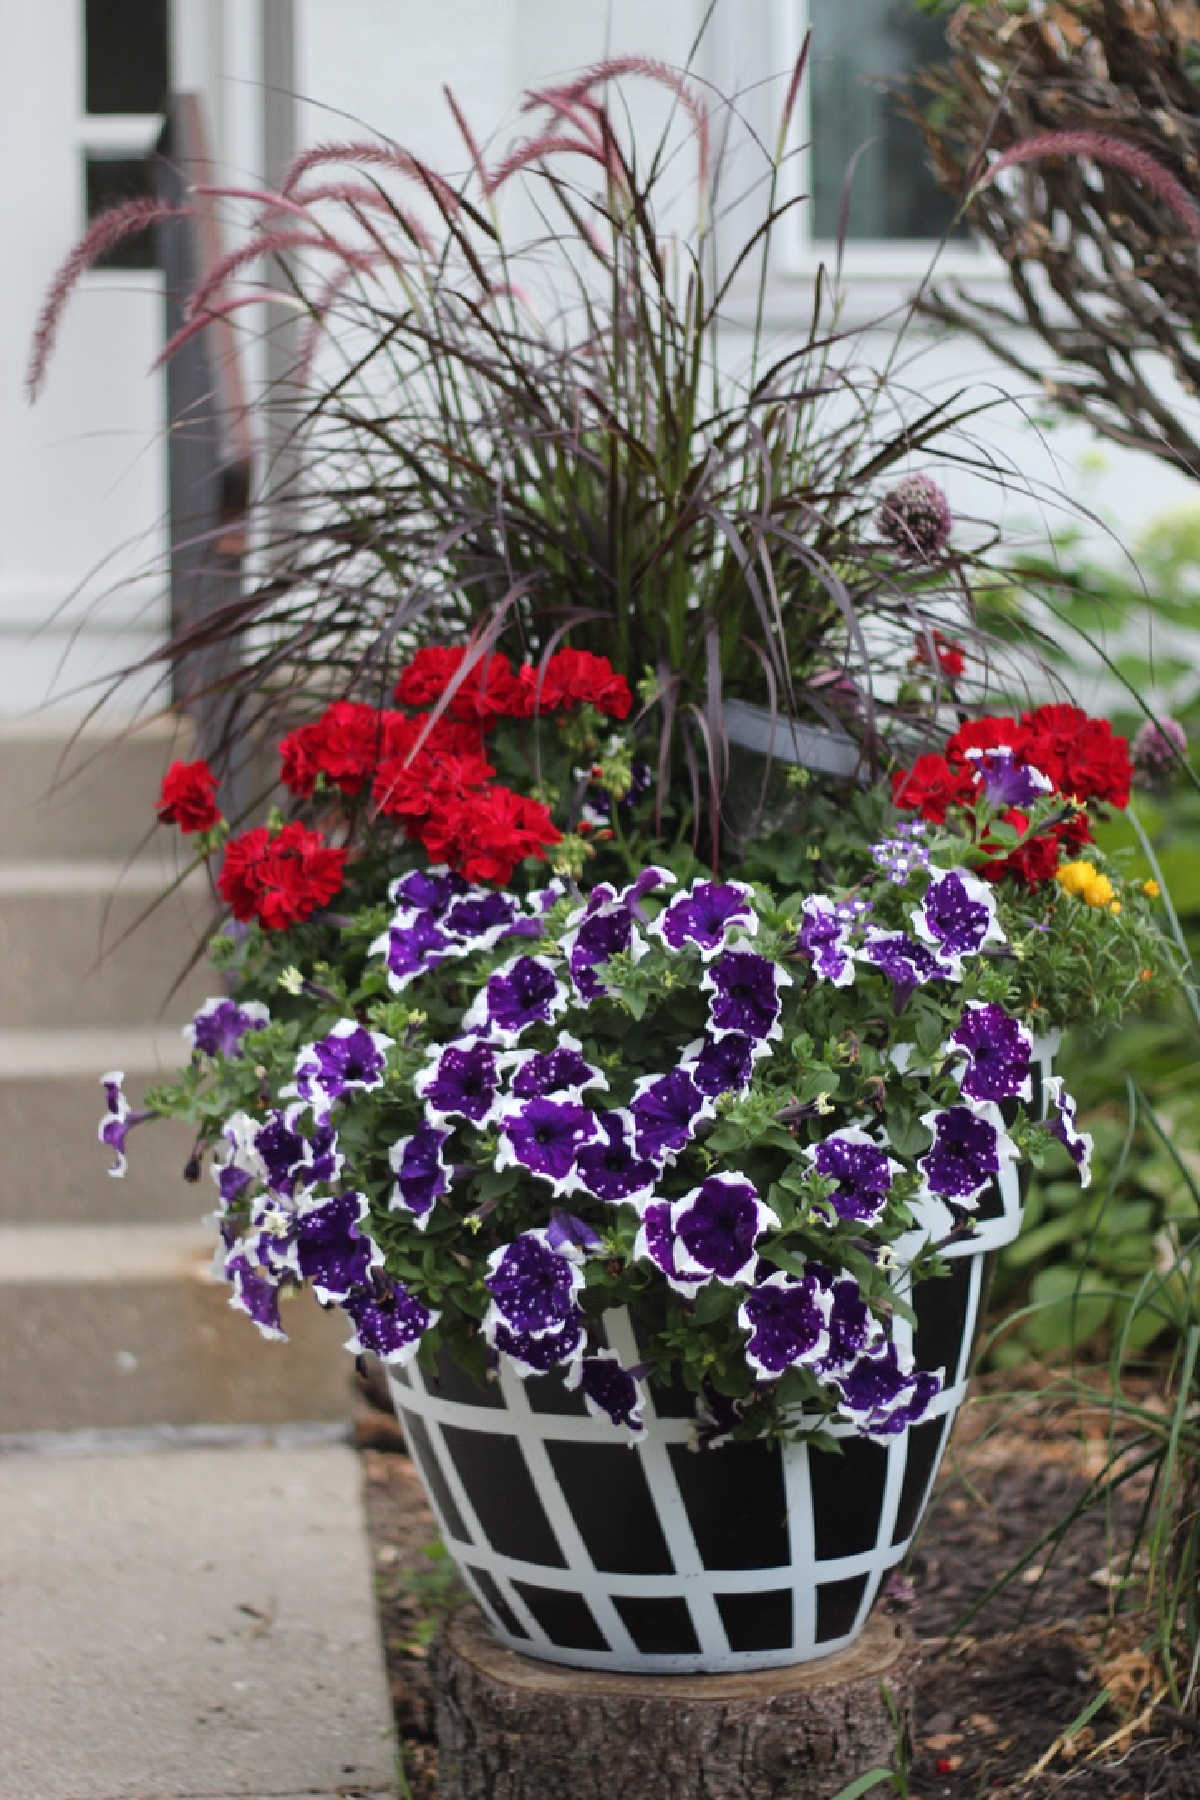 black and white painted flower pot with red geraniums, purple and white petunias and tall purple fountain grass.